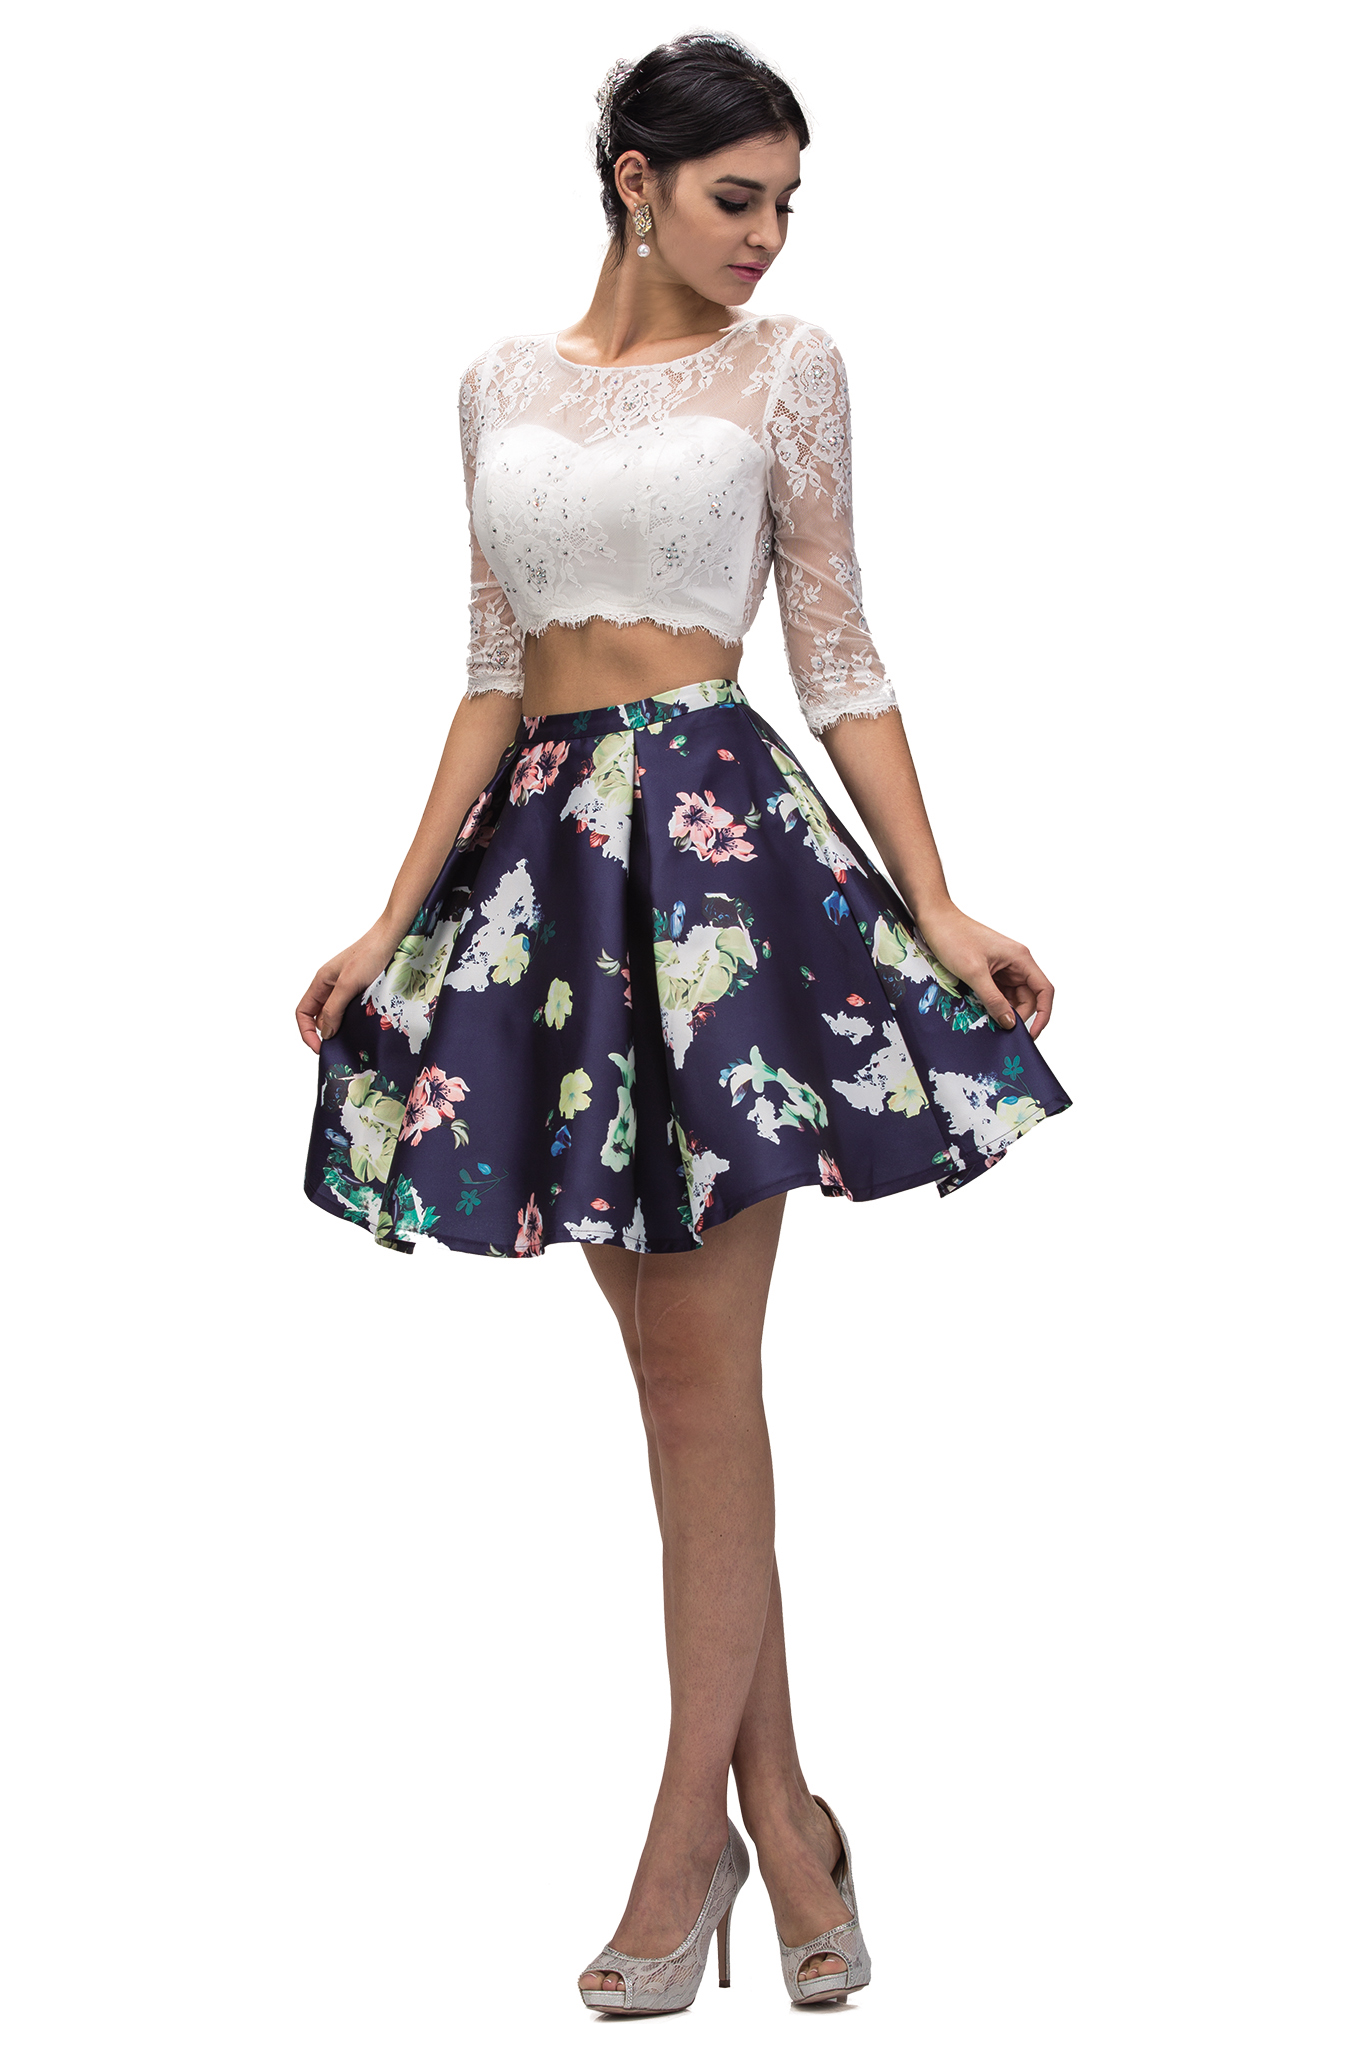 2016 Short Cocktail Prom Dress Floral Print Sleeves Two Piece Set | eBay